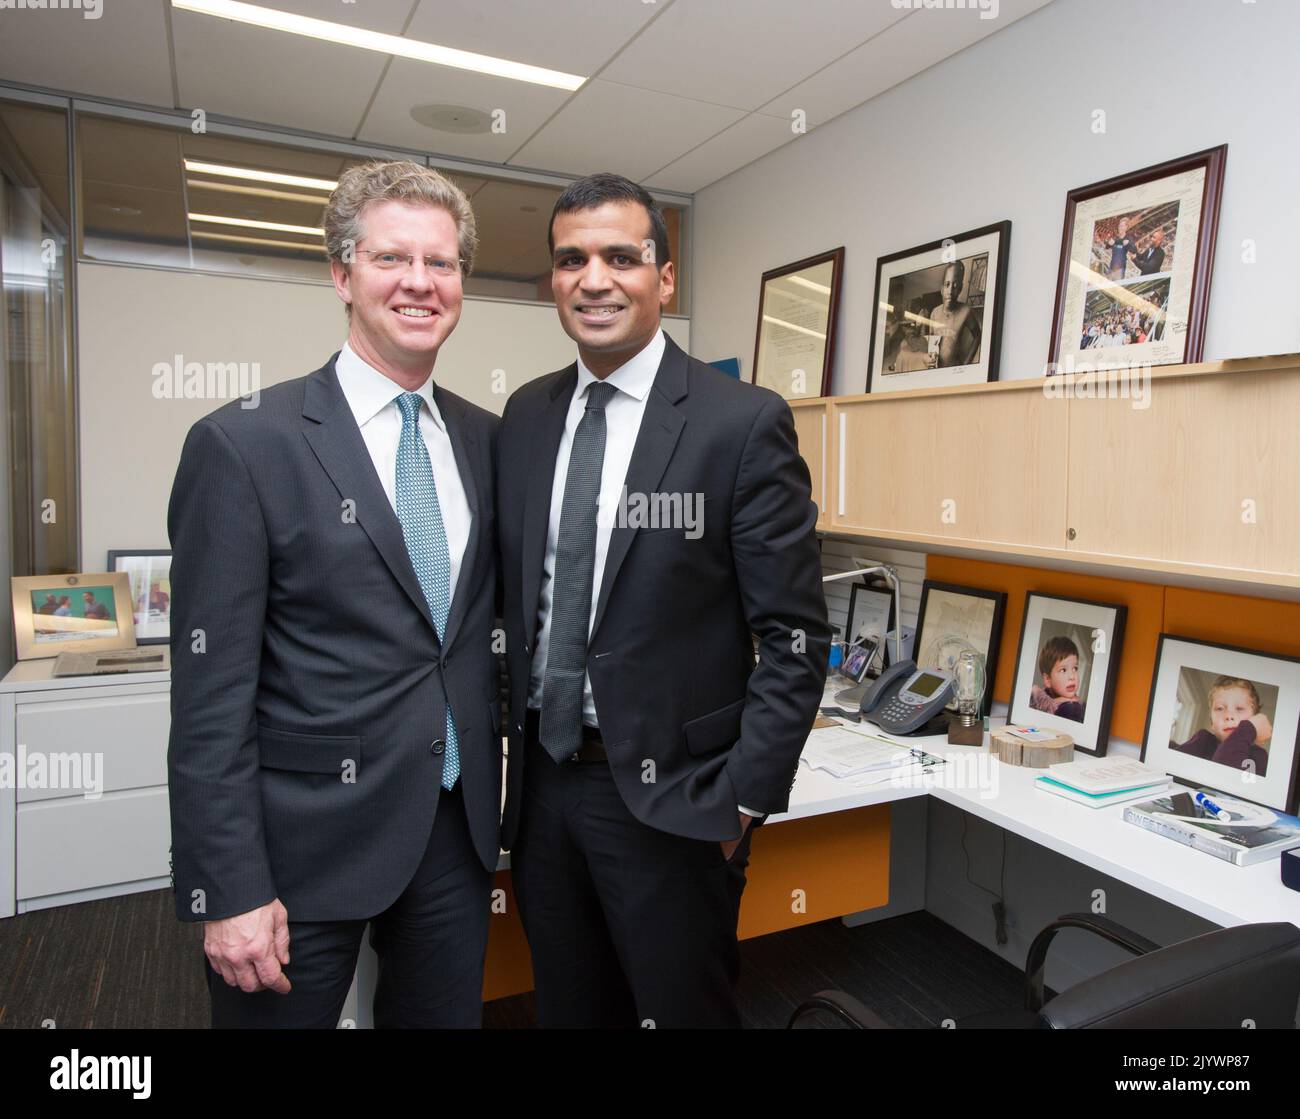 Secretary Shaun Donovan with Omar Khan, Office of Congressional and Intergovernmental Relations. Stock Photo